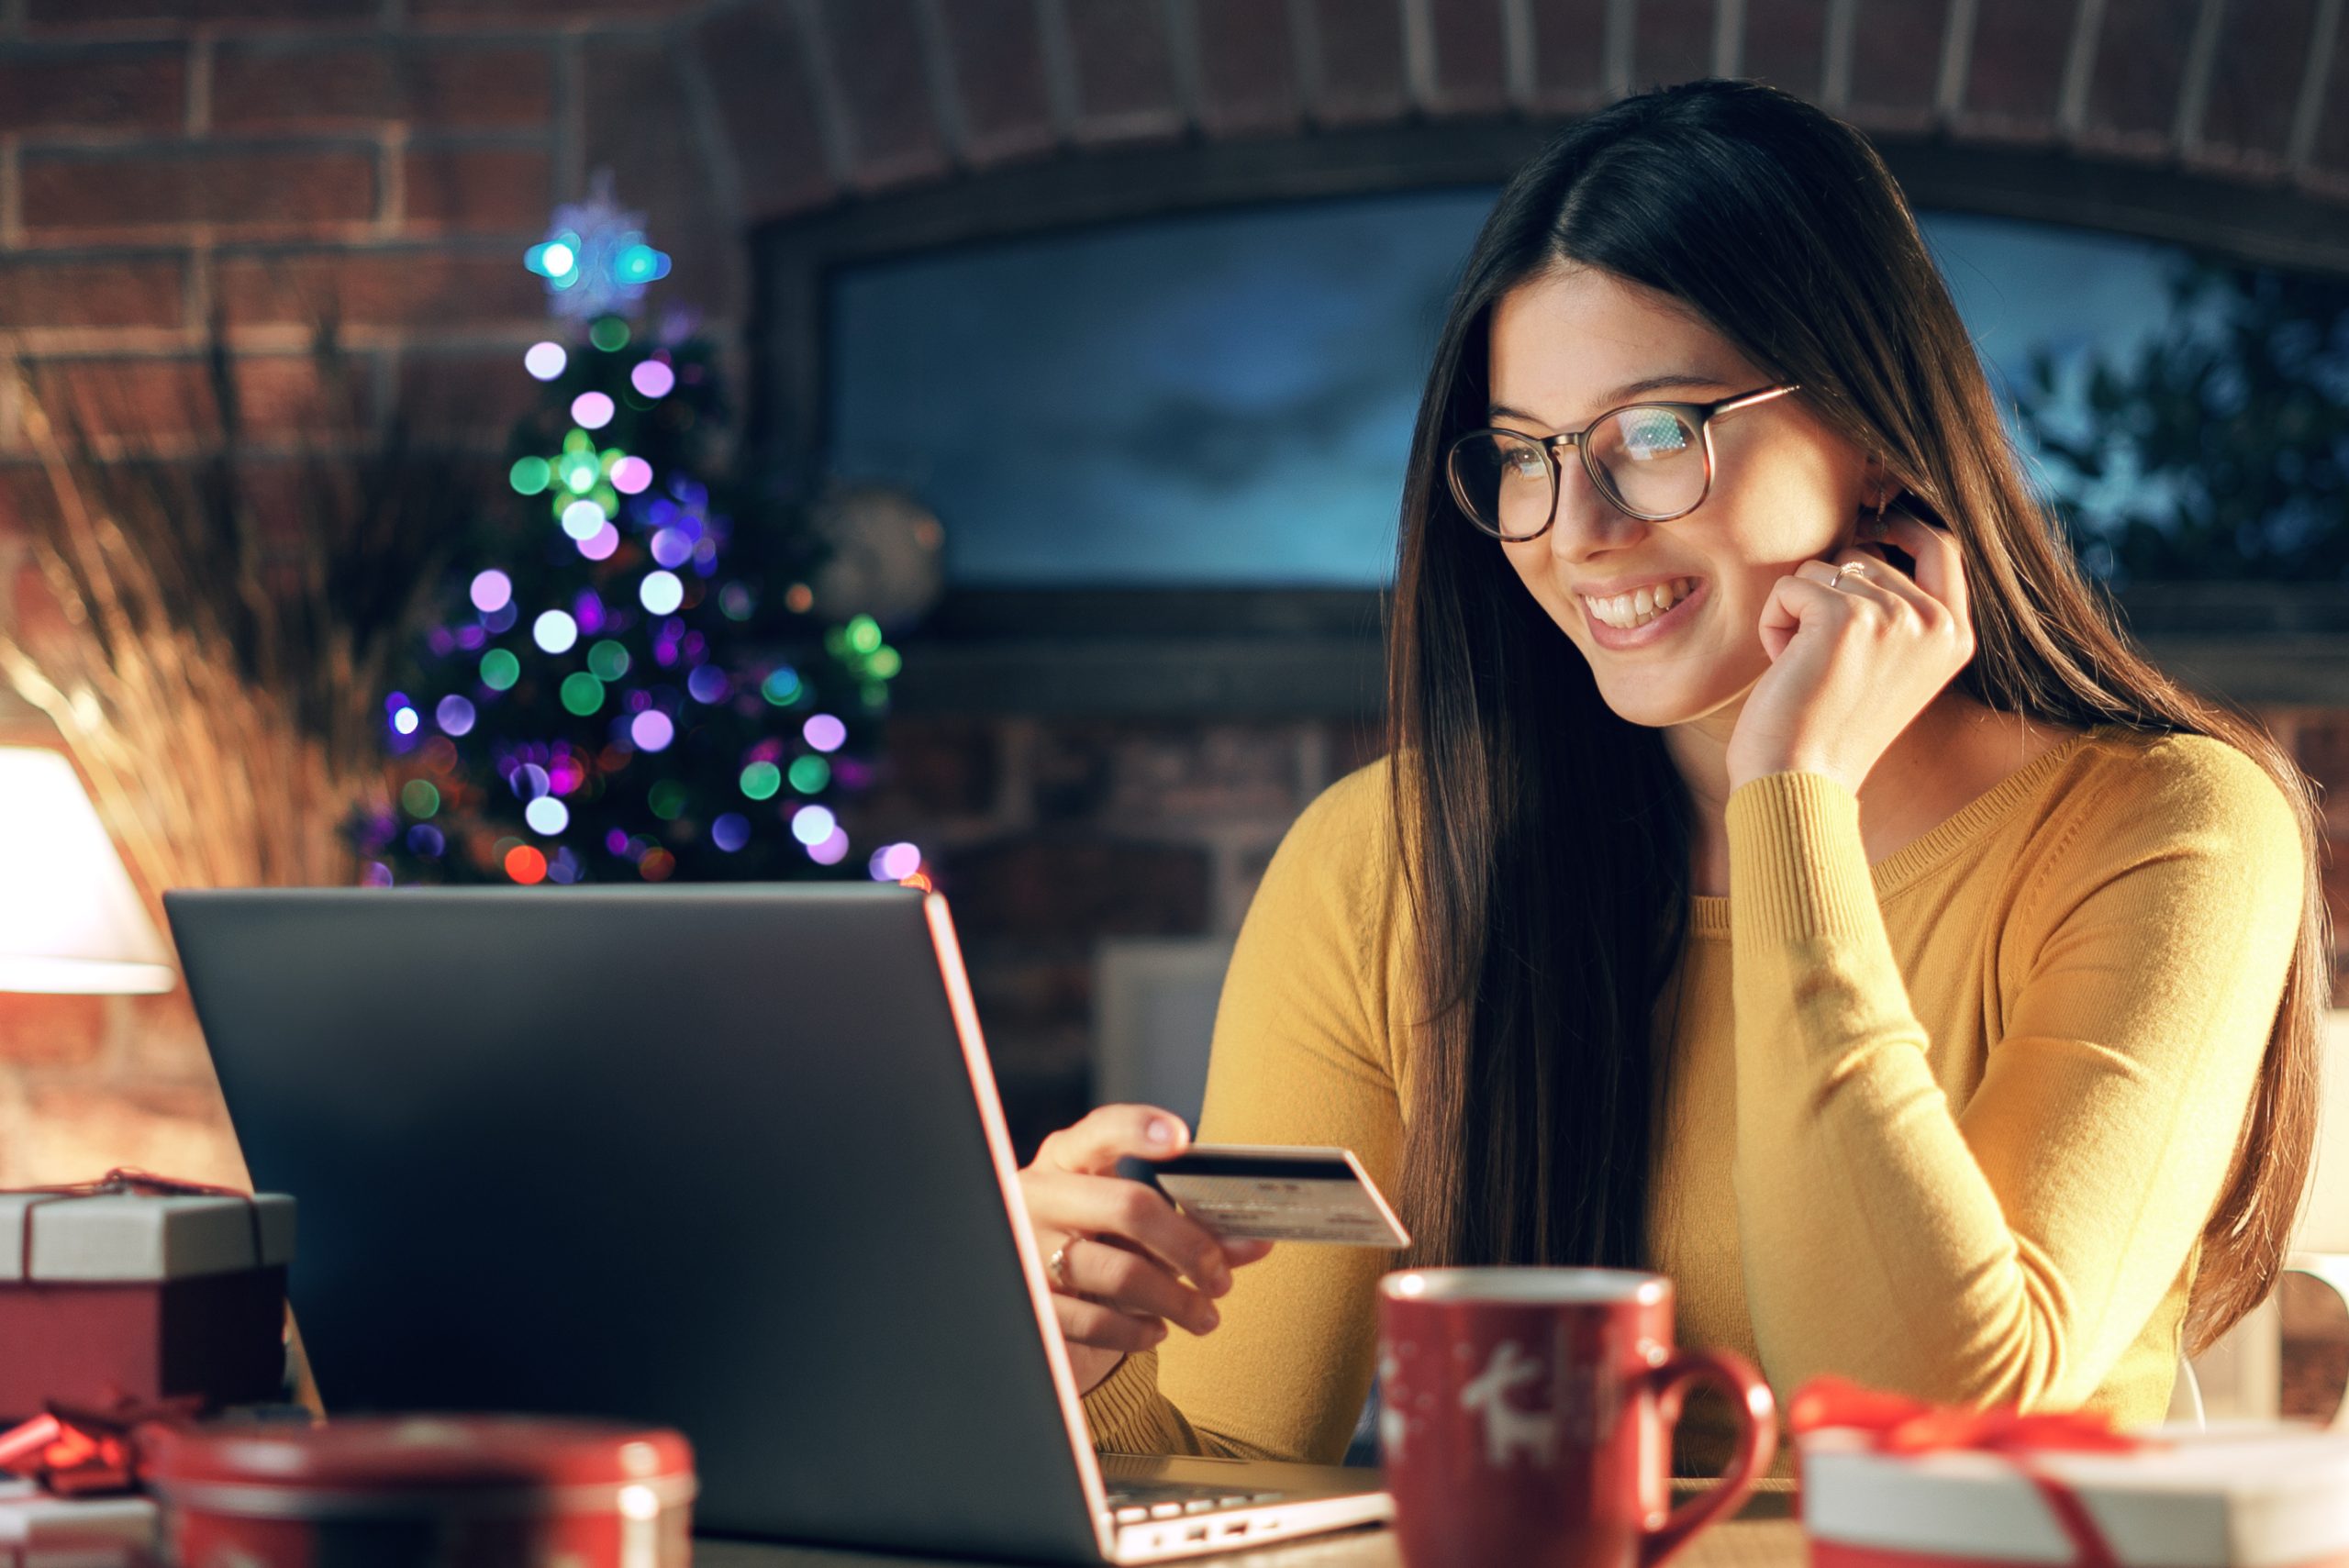 Happy woman buying Christmas gifts online